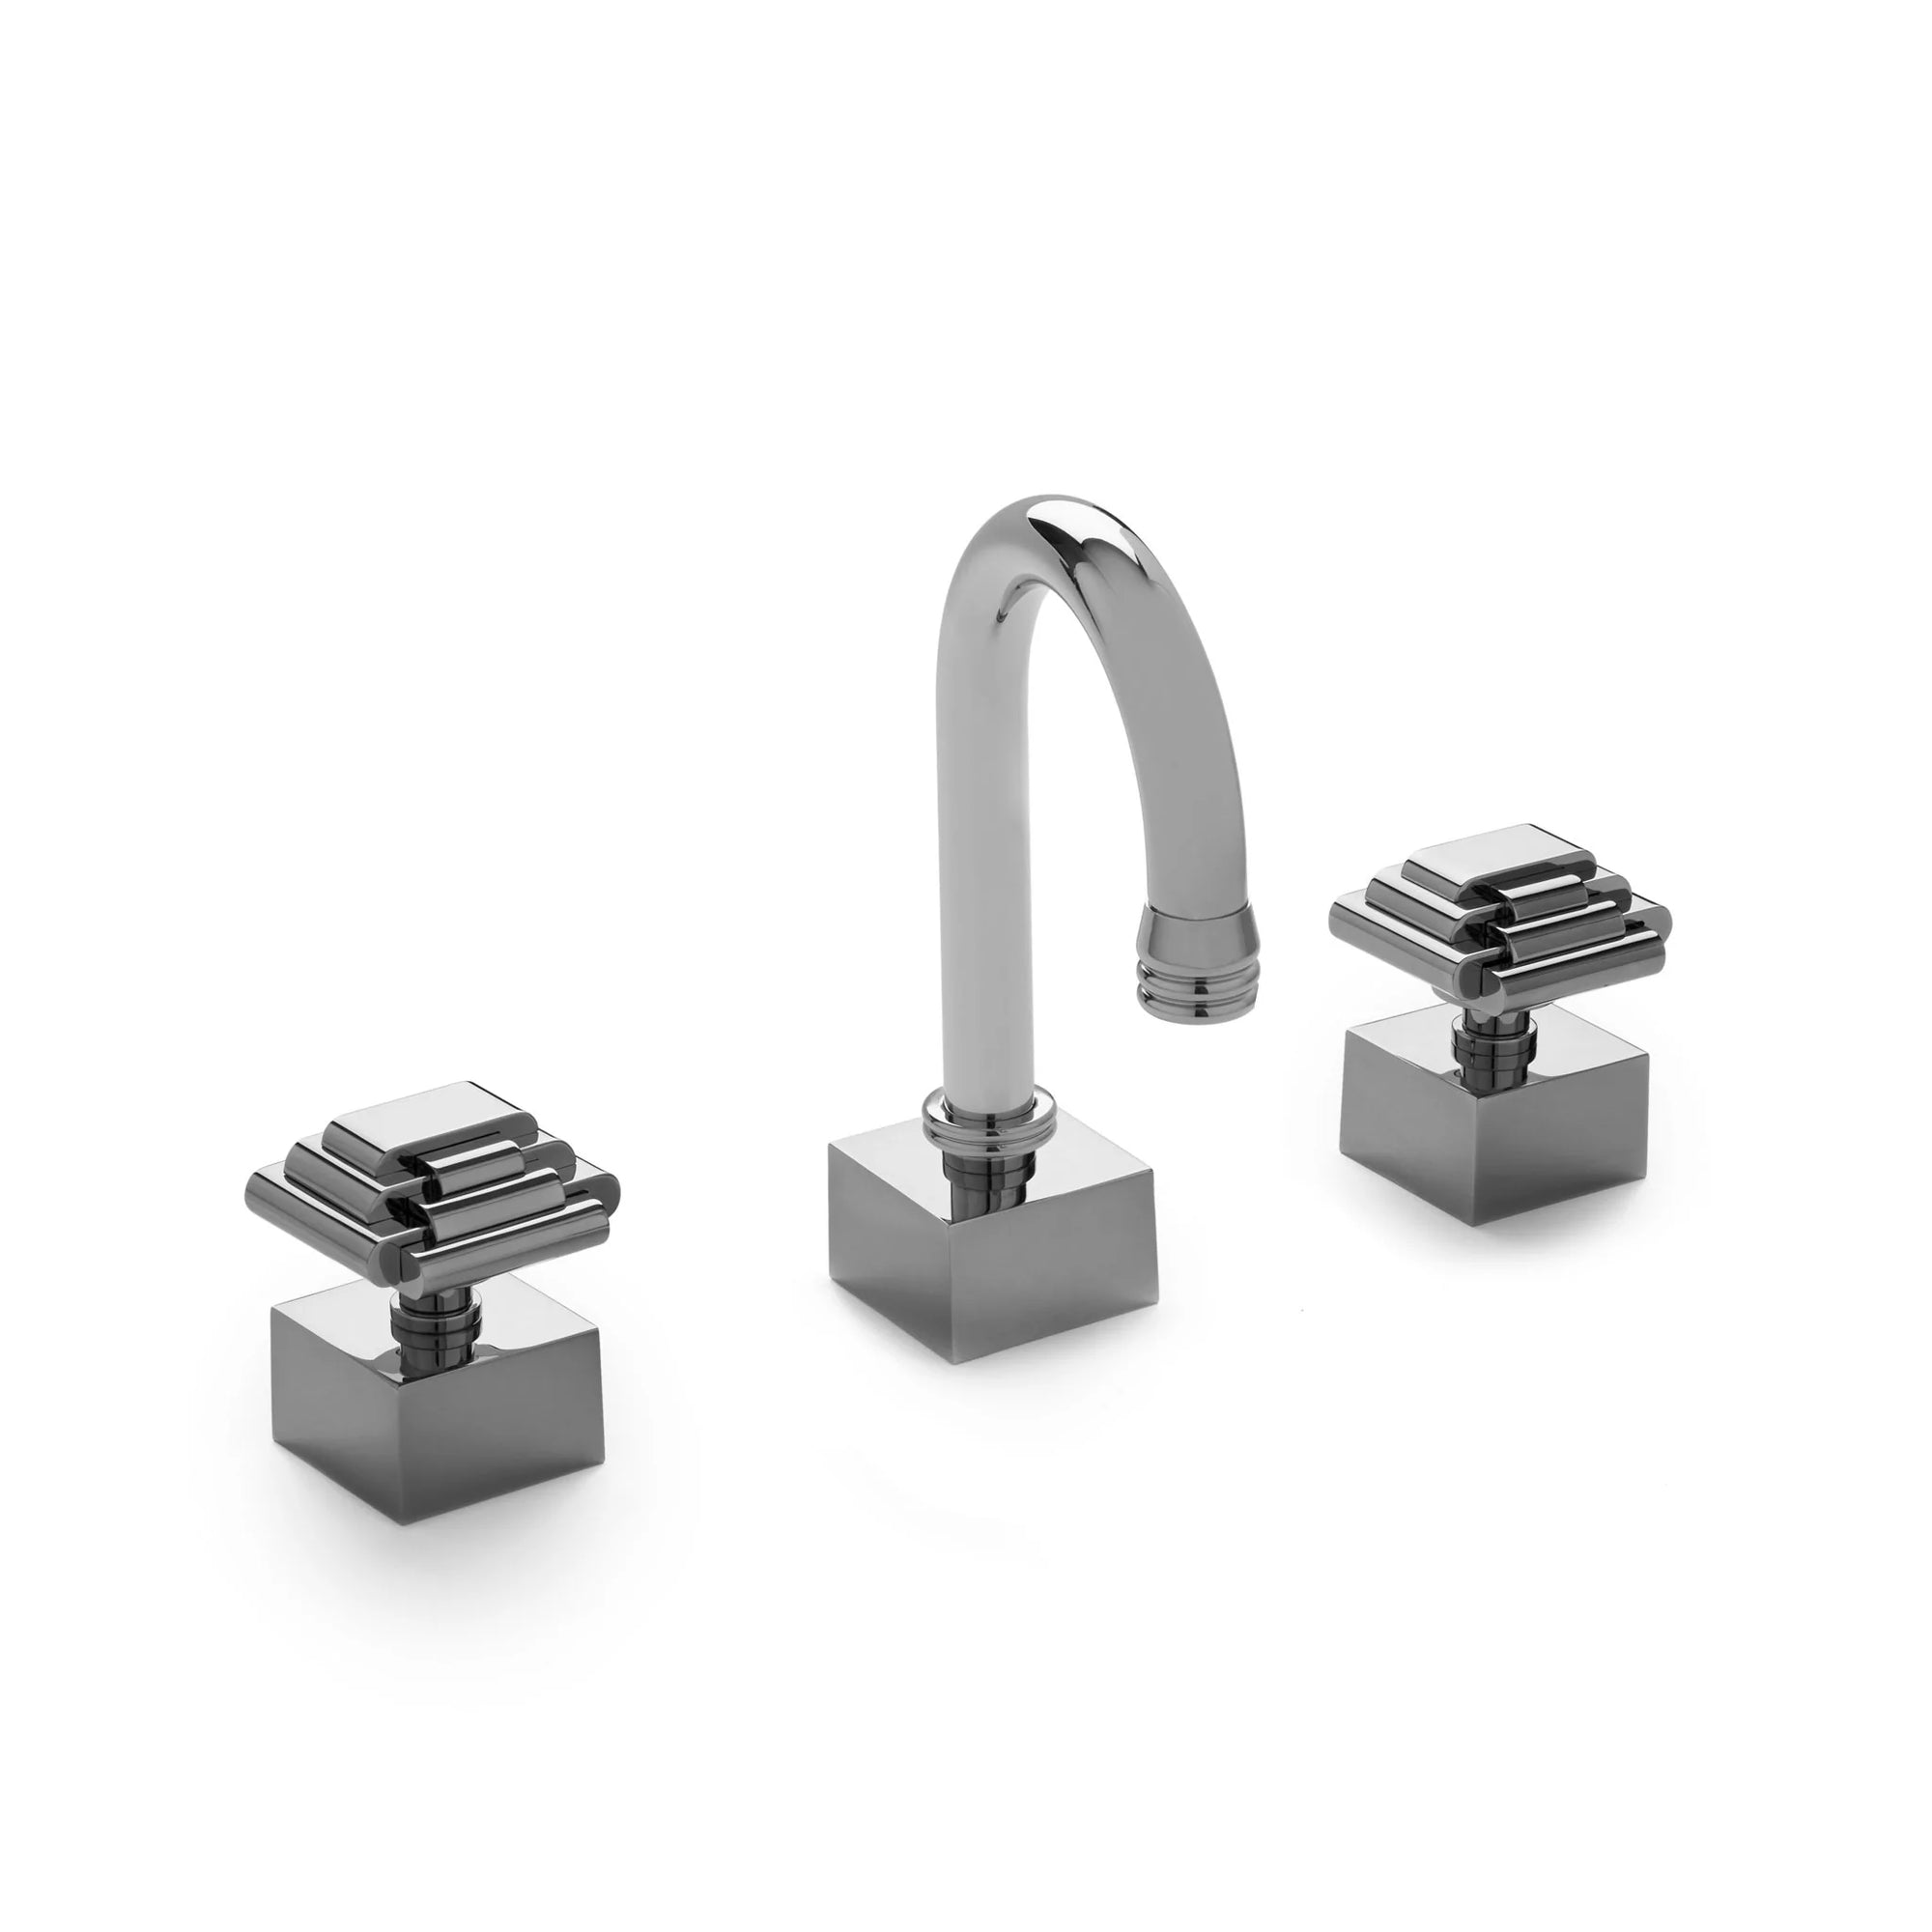 2015BAR800-CP Sherle Wagner International Arco with Nouveau Knob Bar Set in Polished Chrome metal finish